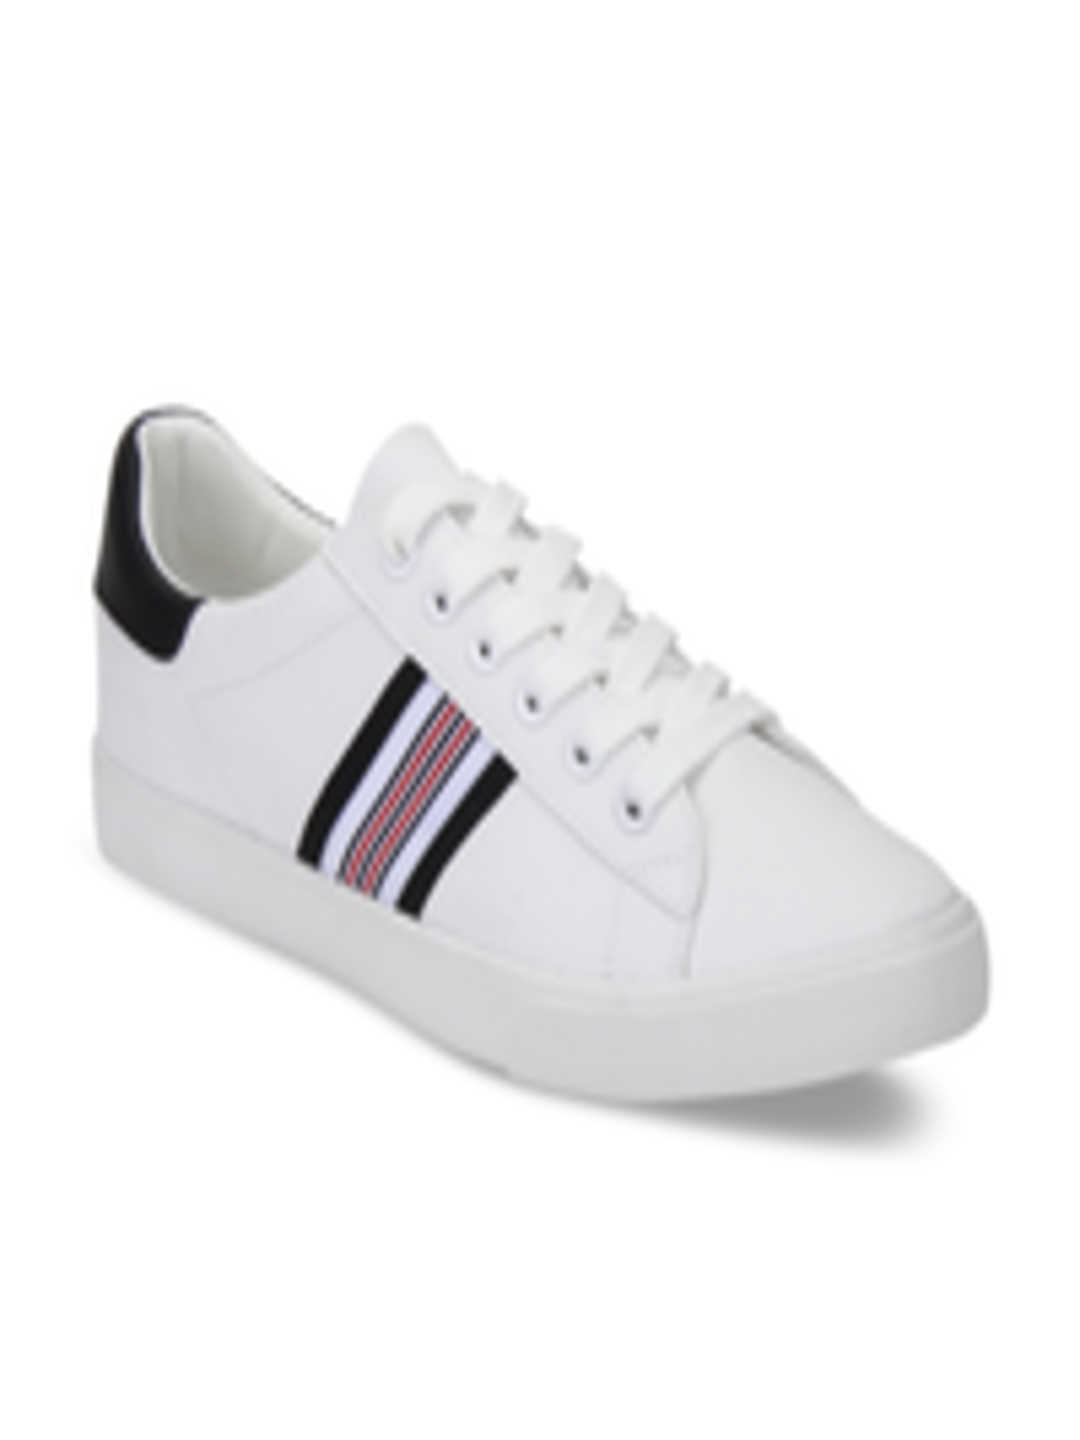 Buy Red Tape Men White & Black Sneakers - Casual Shoes for Men 2526270 ...